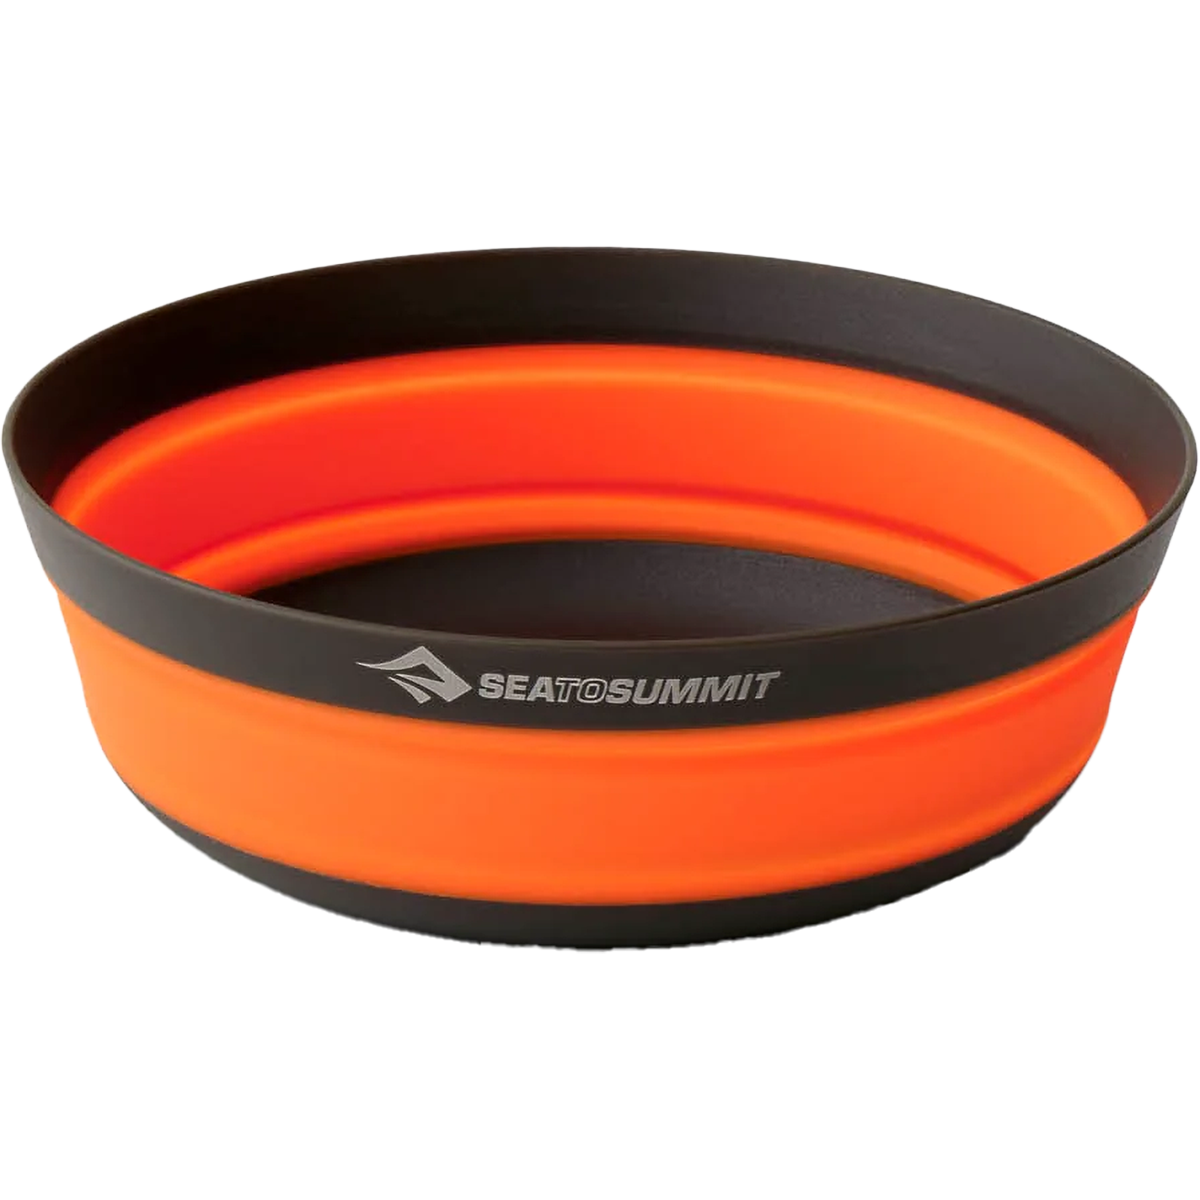 Frontier Ultralight Collapsible Bowl - Medium alternate view